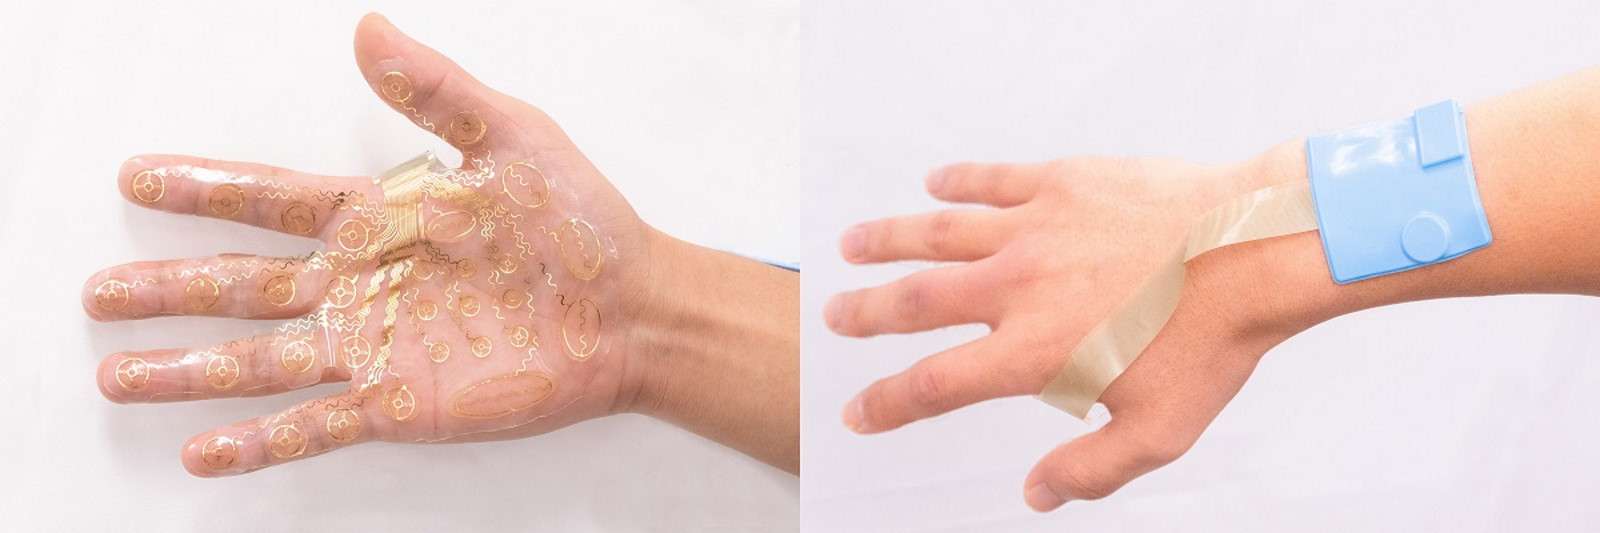 This connected hydrogel skin allows you to feel objects in virtual reality